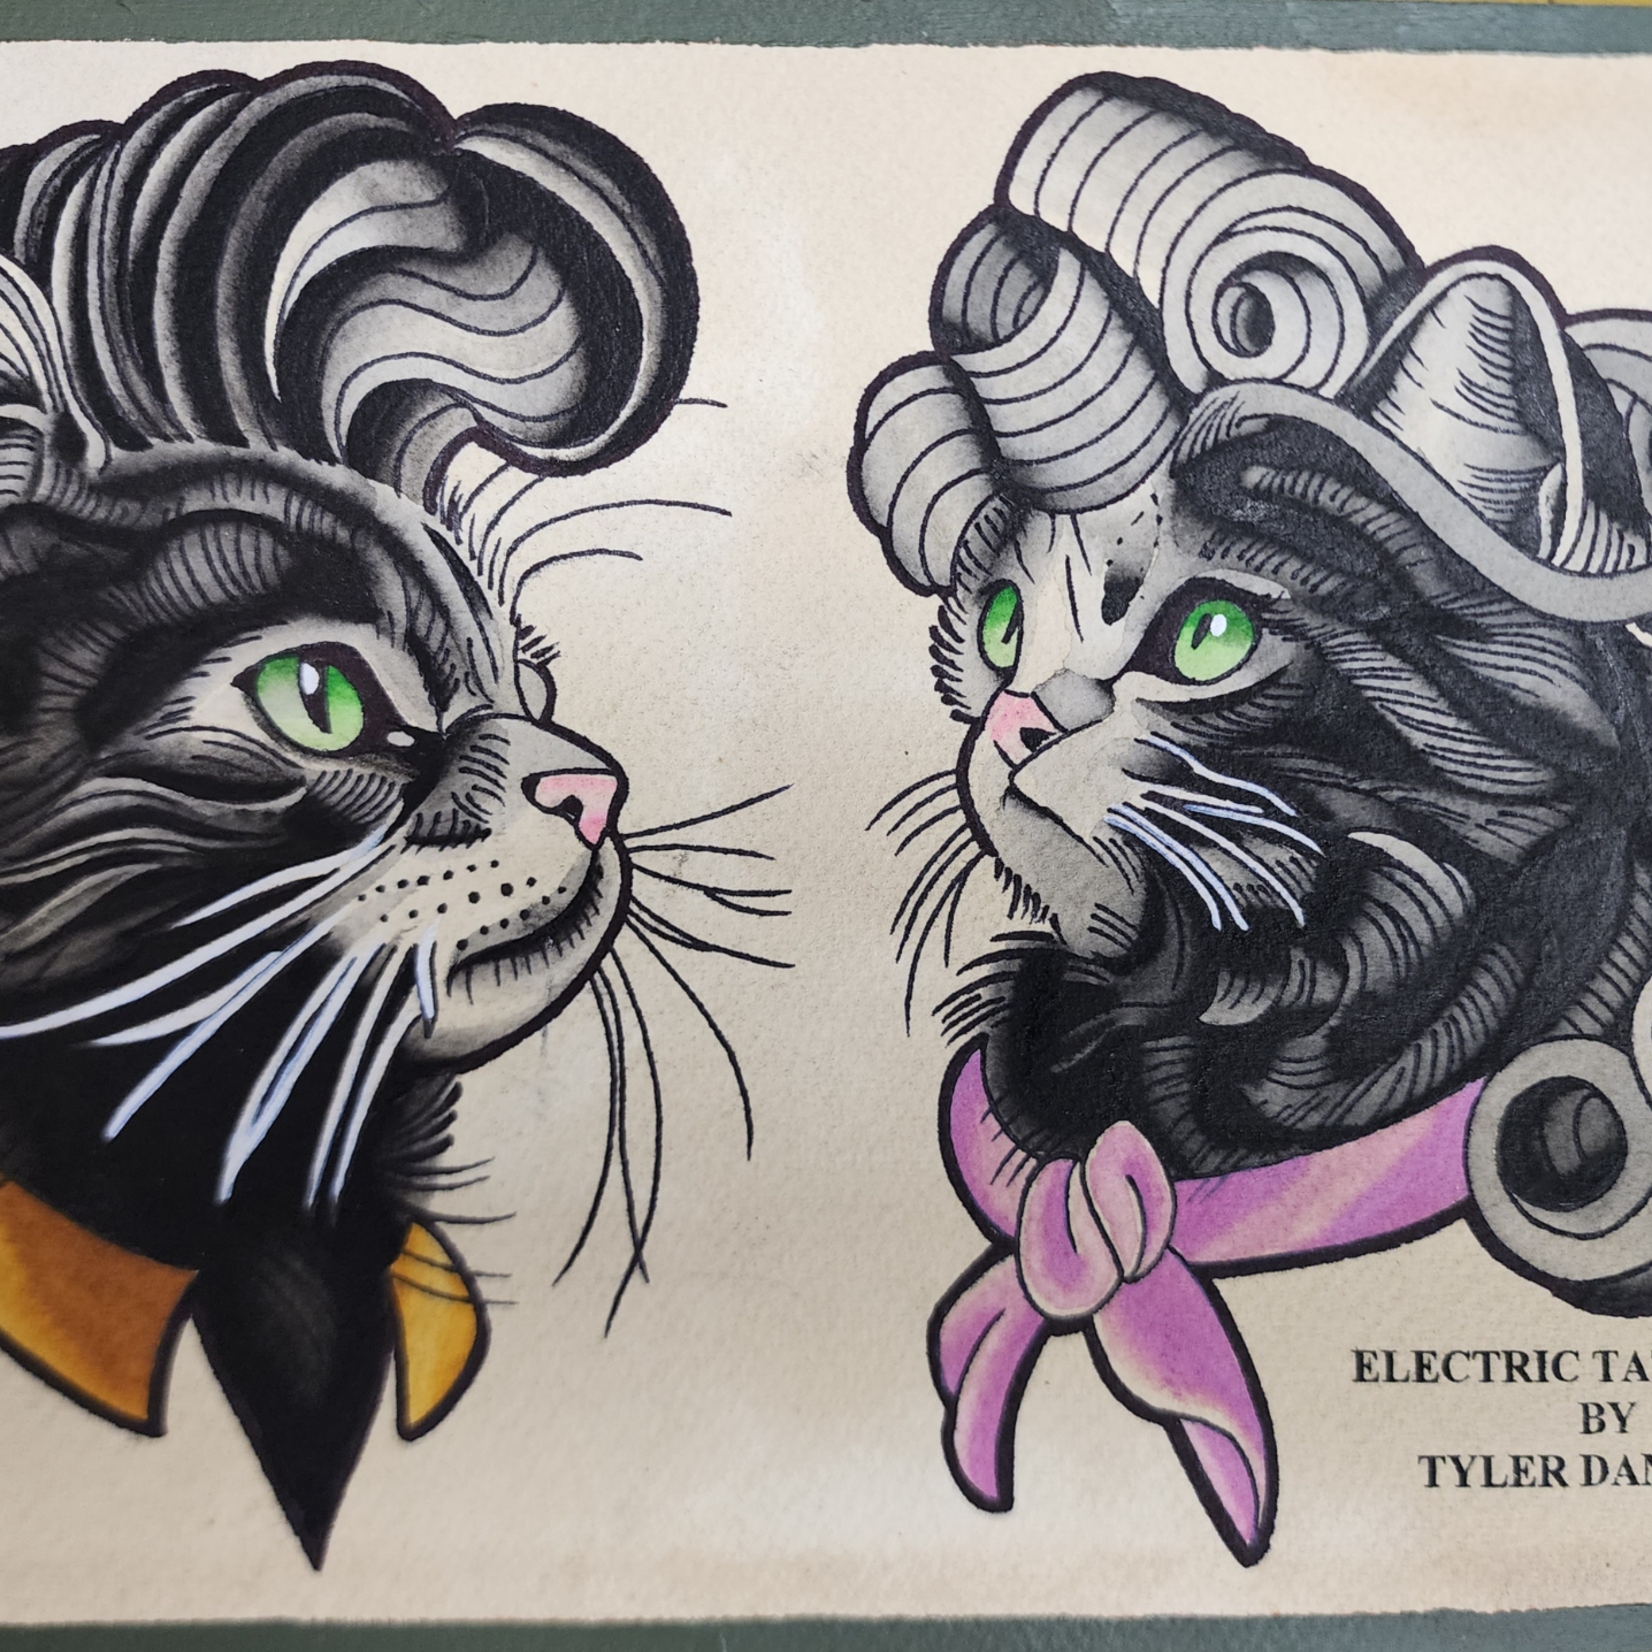 Human Kanvas Up For Grabs by Tyler - Hiss and Purrs Series "PURRS"